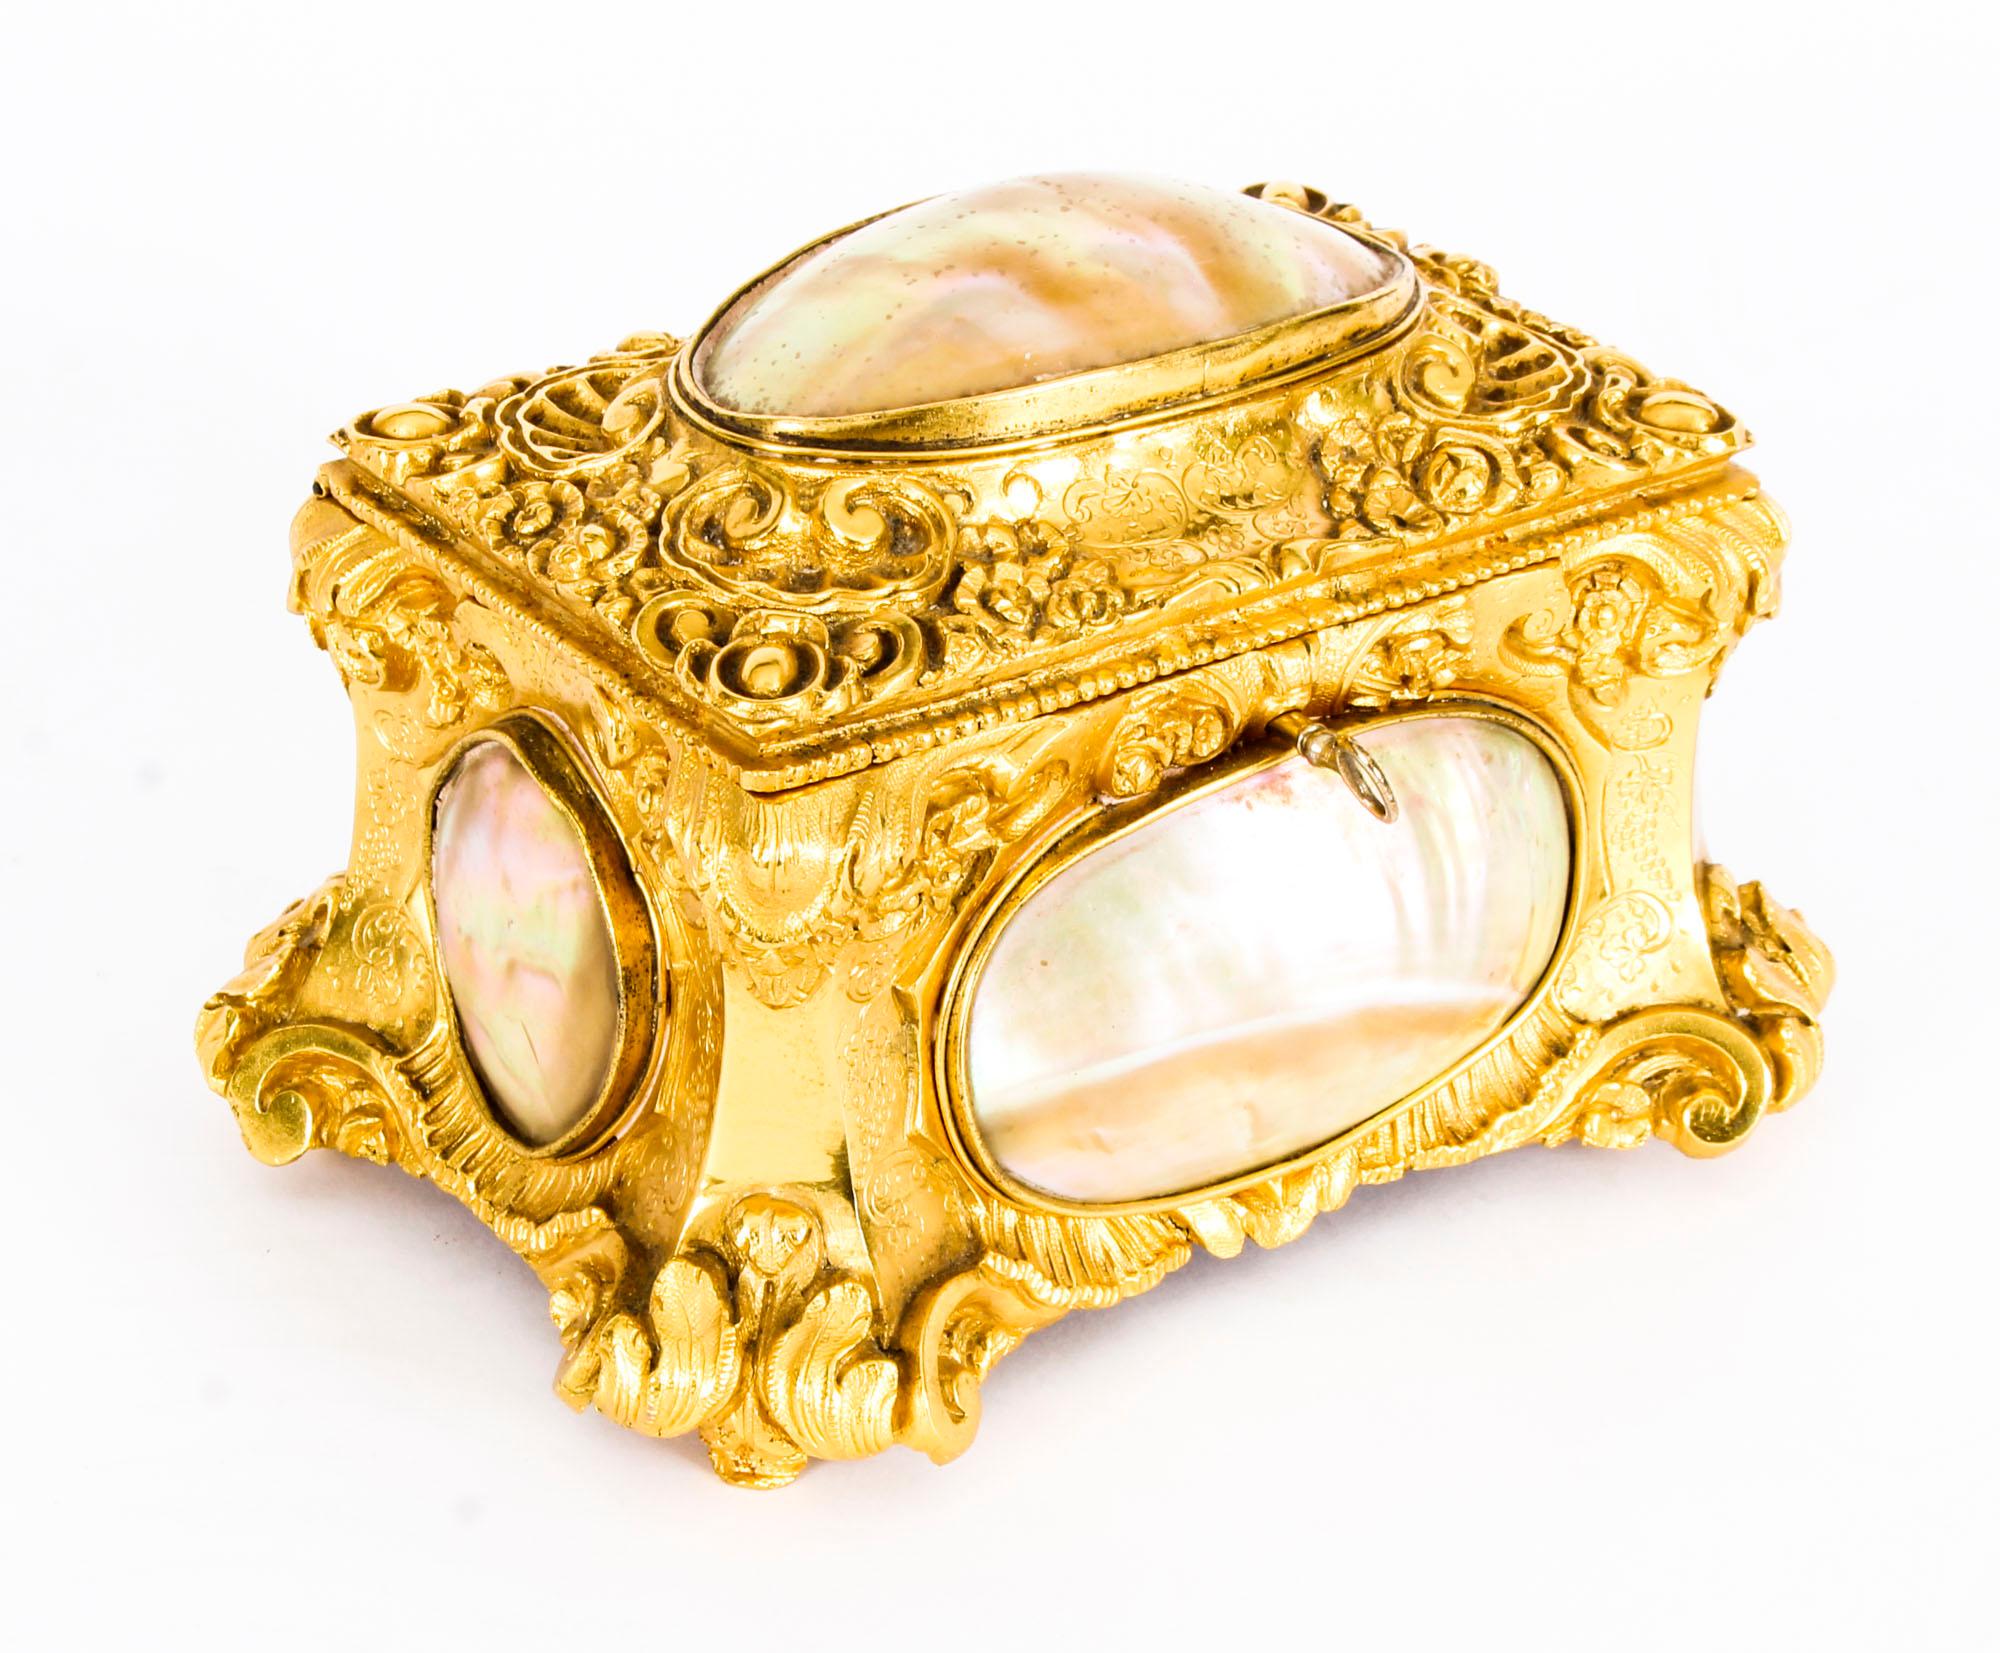 Antique French Ormolu Casket with Abalone Shell Plaques, 19th Century 9